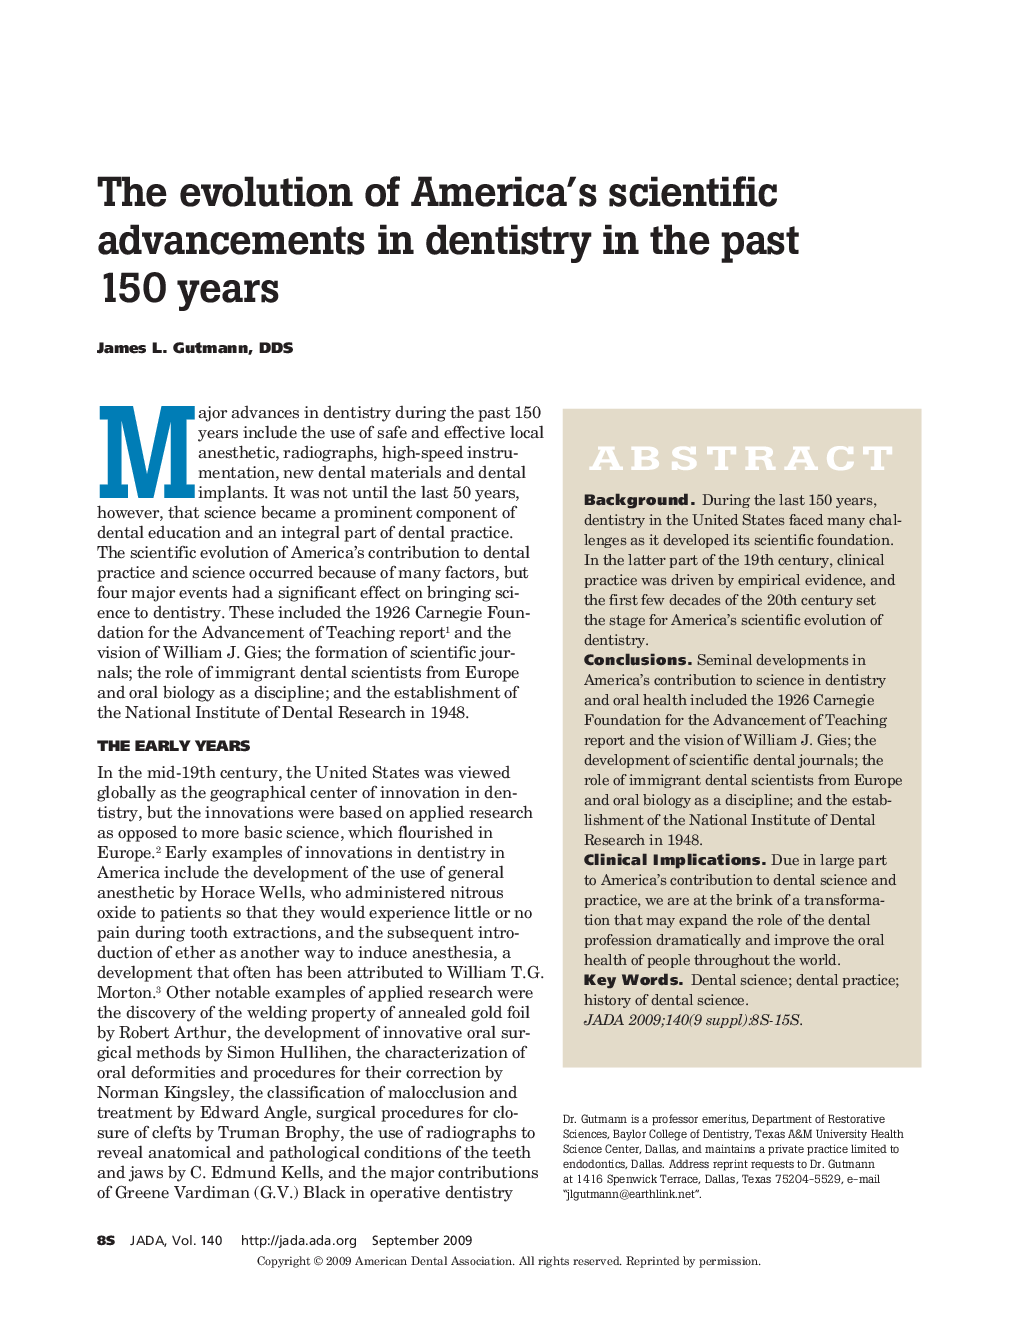 The Evolution of America's Scientific Advancements in Dentistry in the Past 150 Years